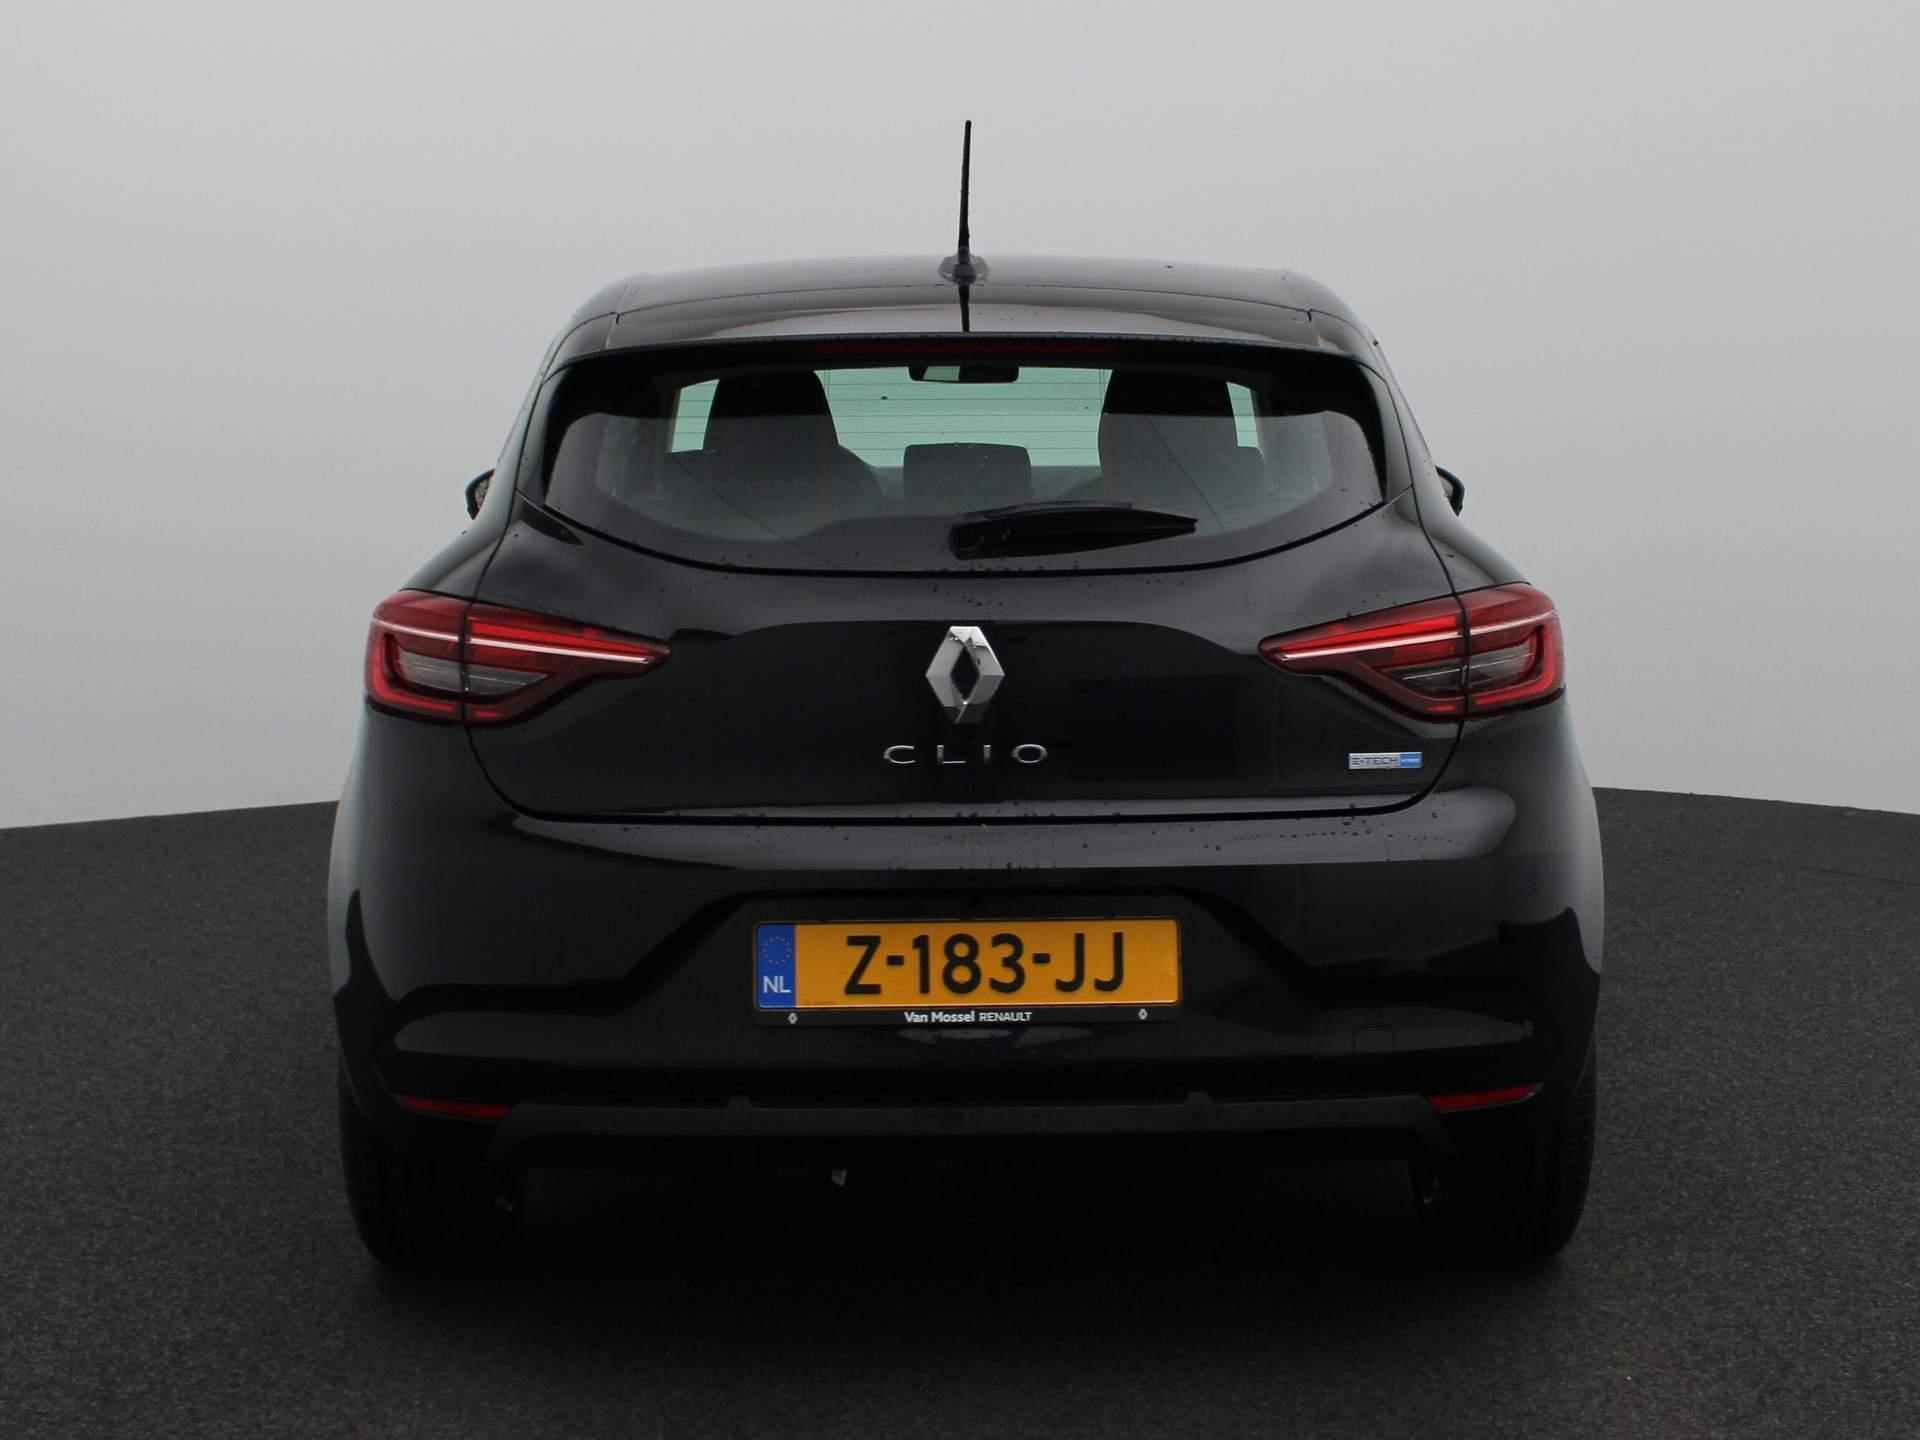 Renault Clio 1.6 E-Tech Full Hybrid 145 Equilibre | PDC Achter | Airconditioning | Draadloze Apple Carplay & Android Auto | Cruise Control | Licht- en regensensor - 5/36